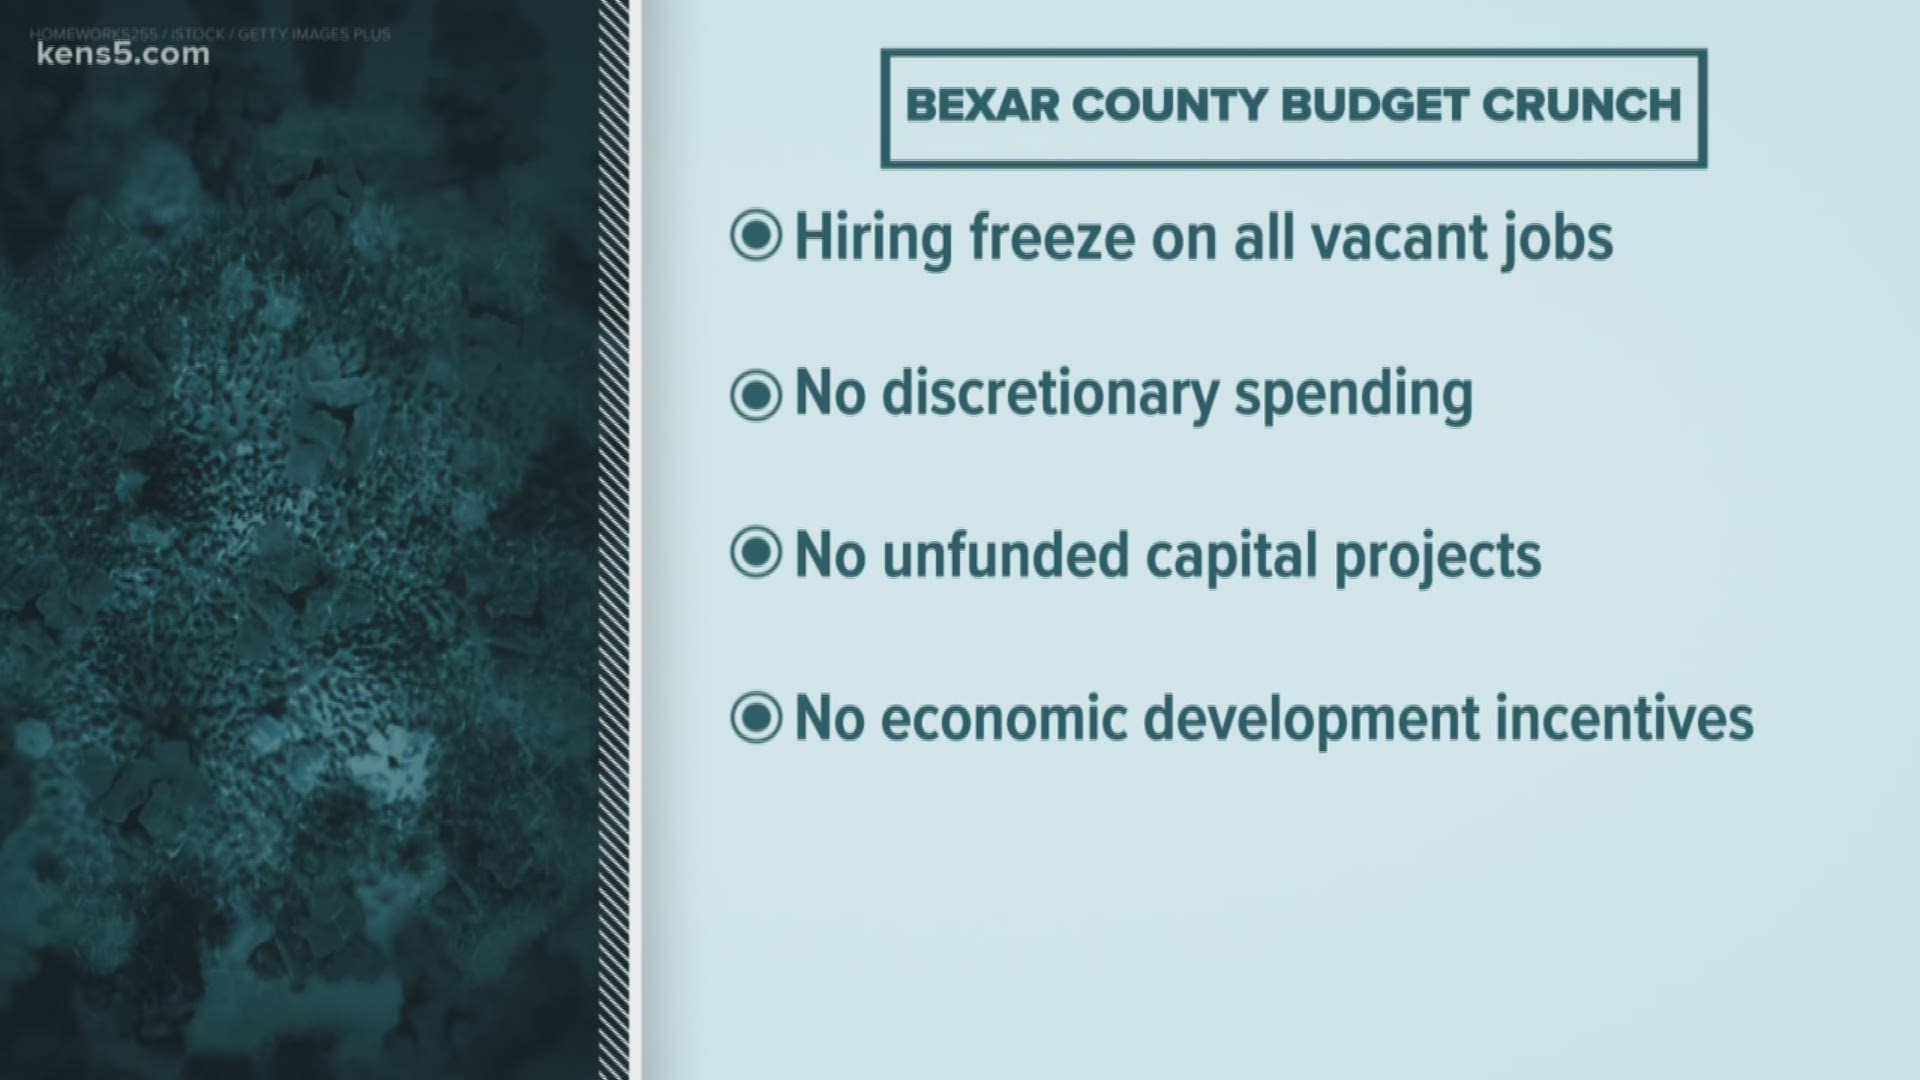 Bexar County expects to lose $70 to $100 million in the next budget as a result of the coronavirus pandemic.